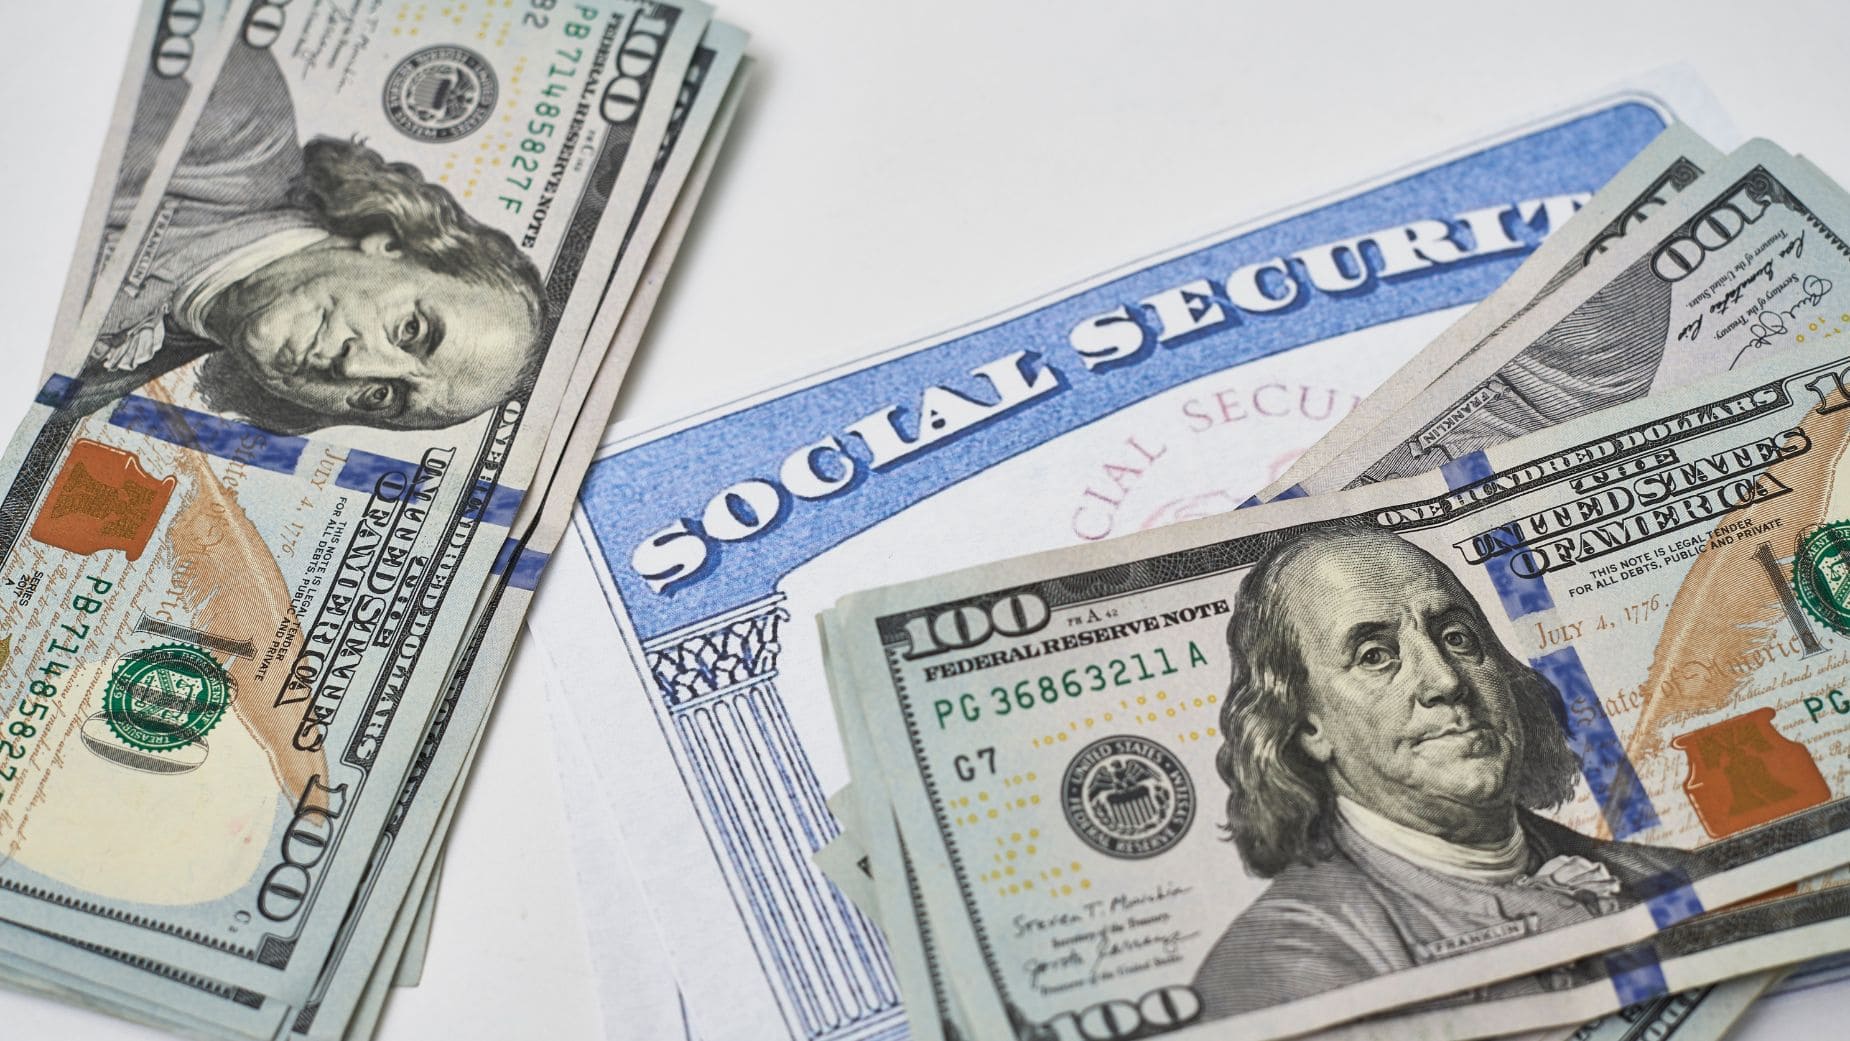 You can get a 943 dollars check from Social Security